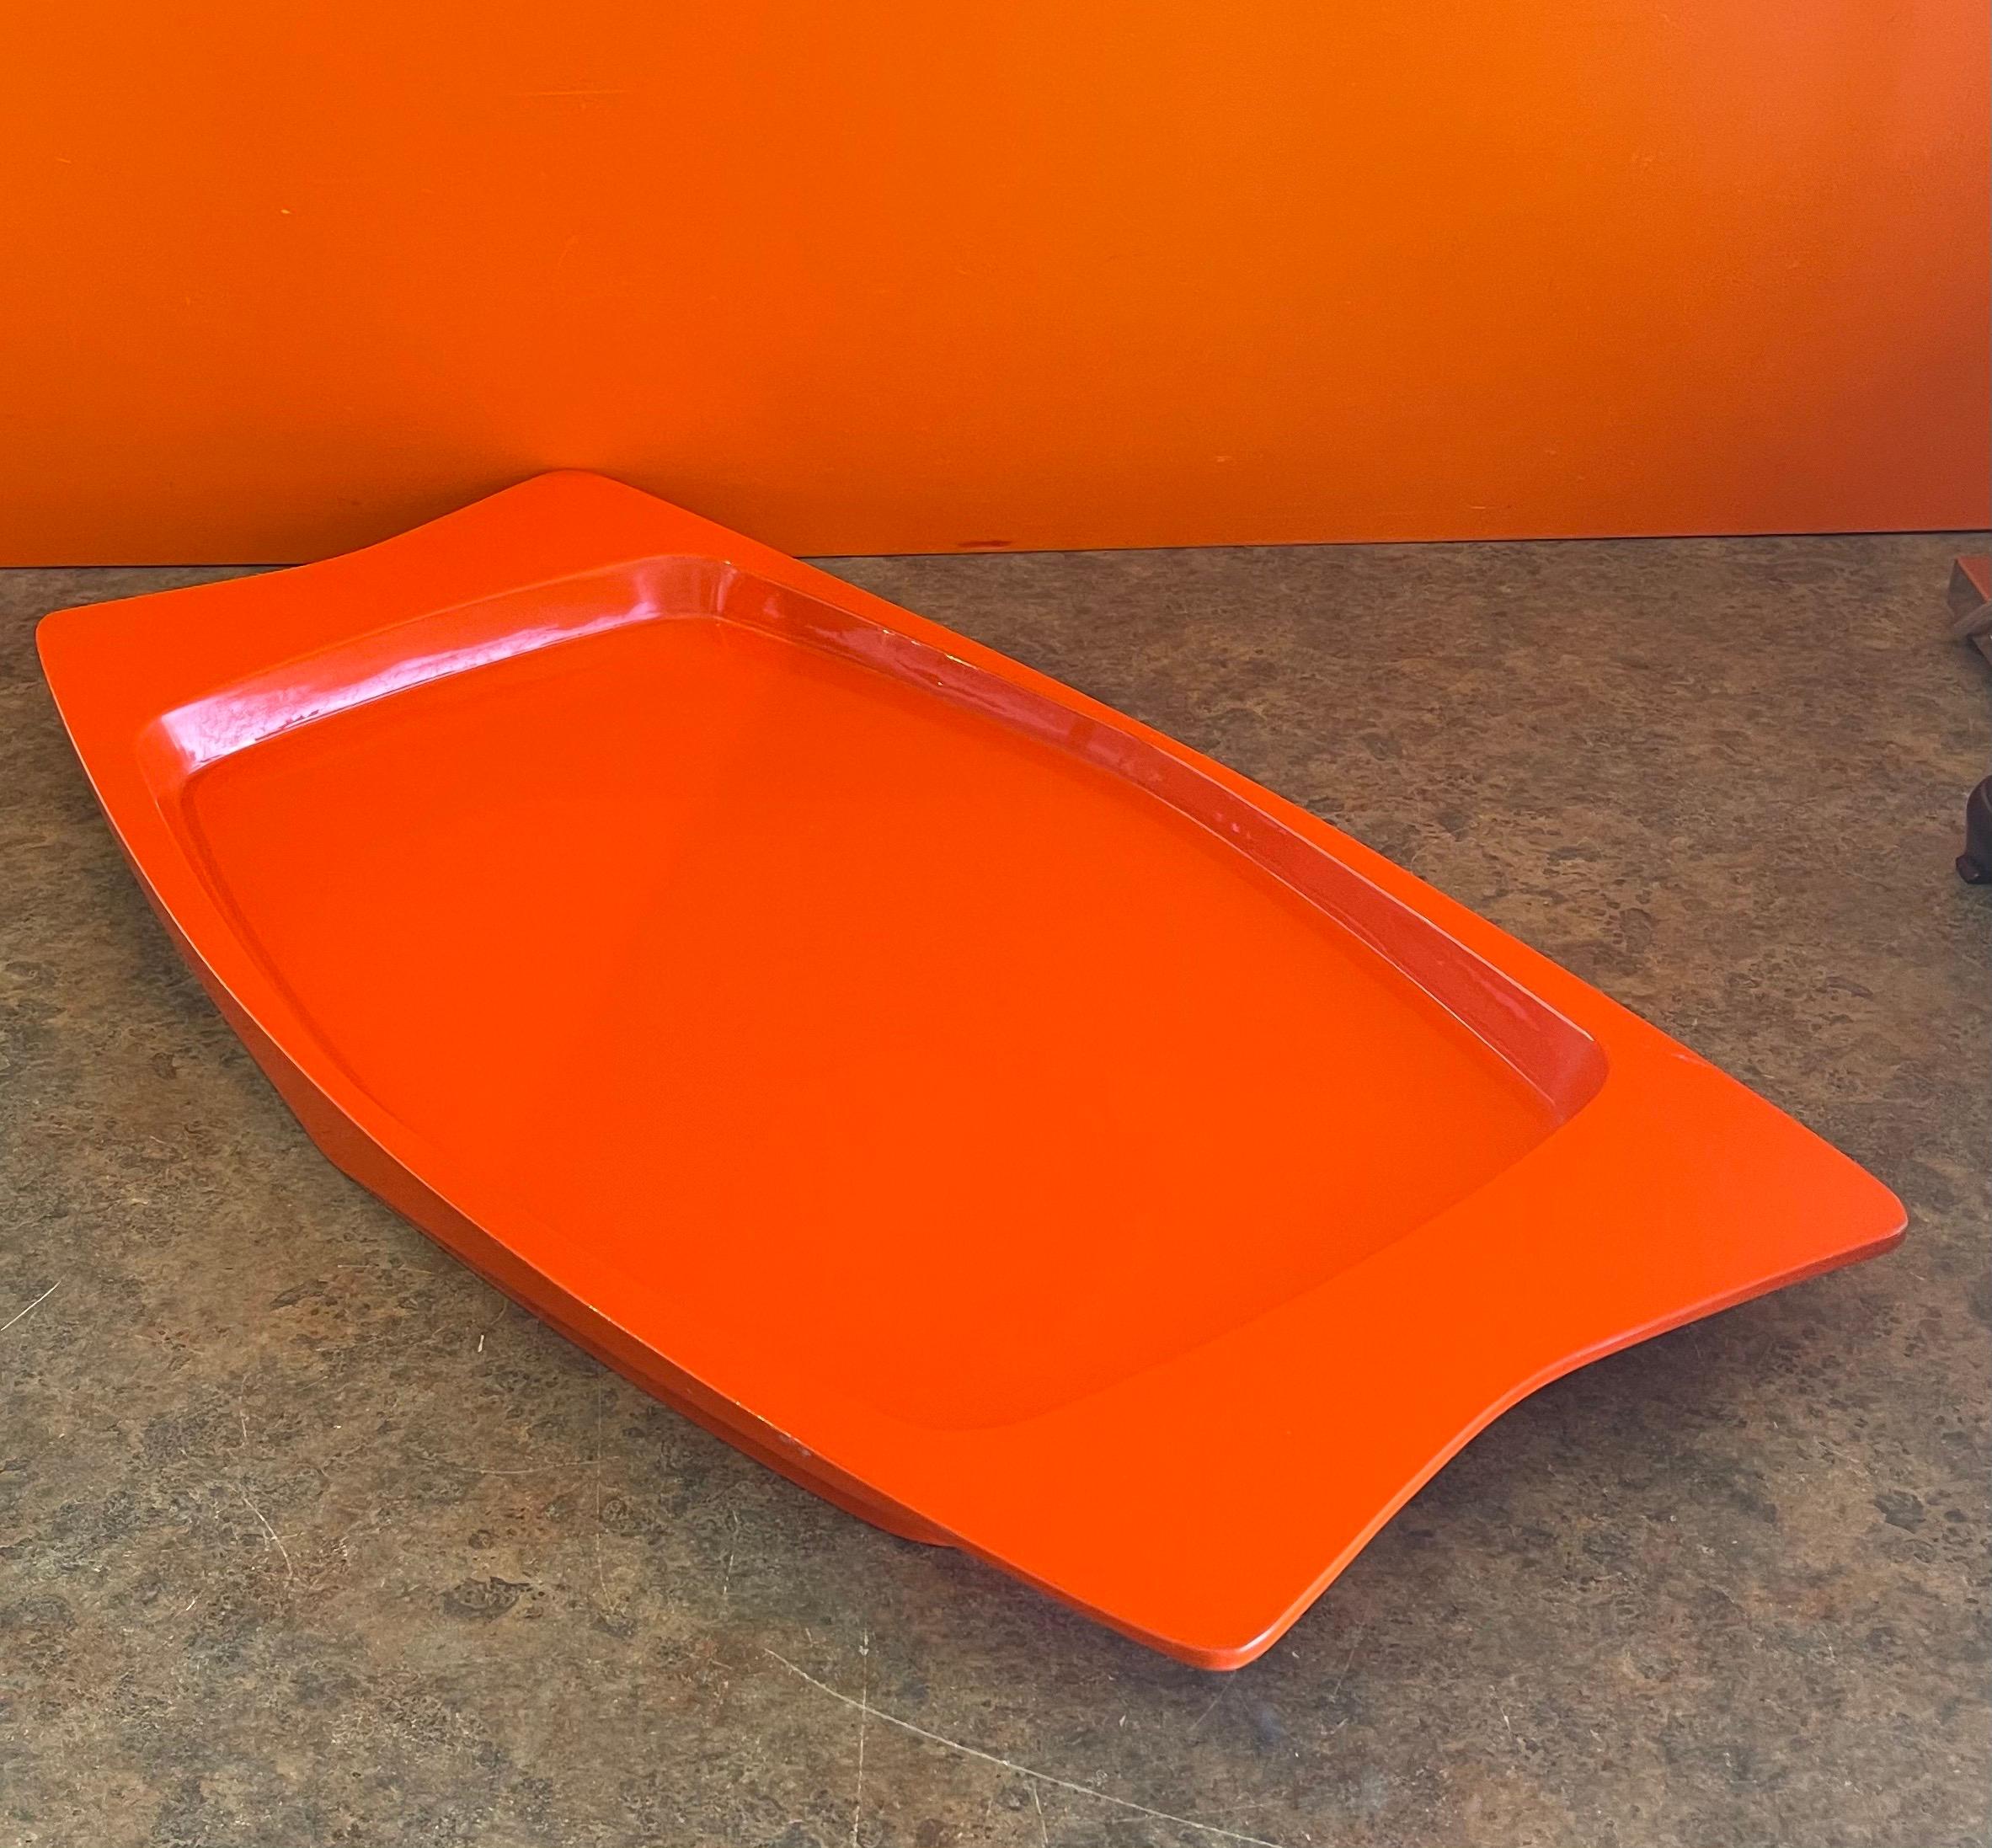 20th Century Extra Large Orange Lacquer Tray by Jens Quistgaard for Dansk- Early Production